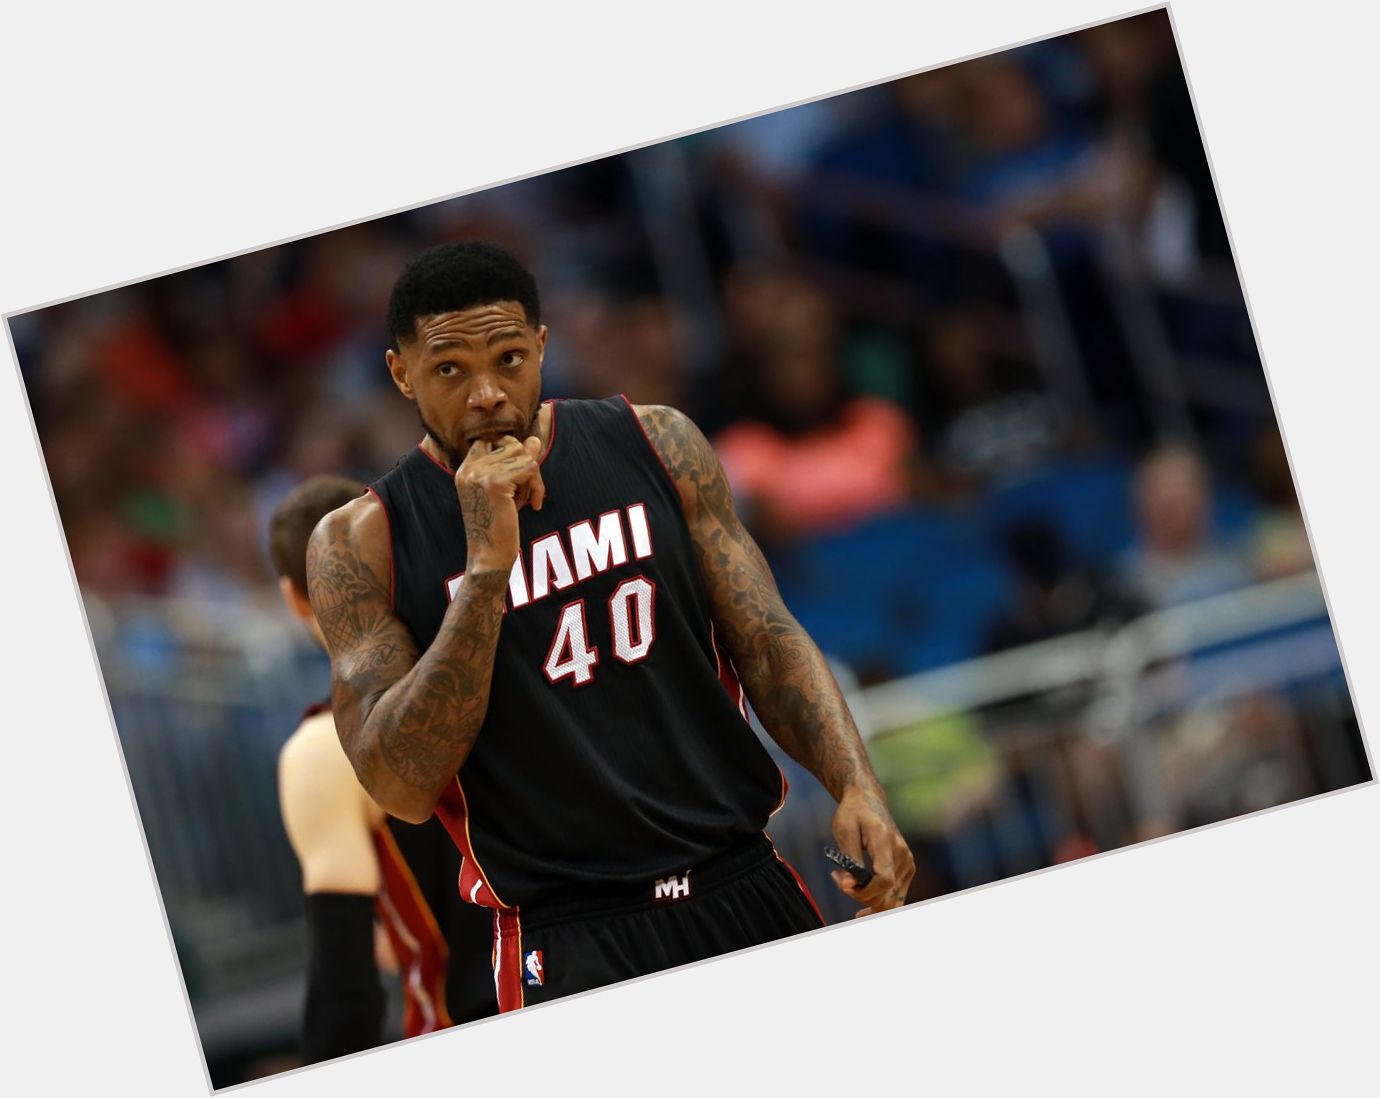 <a href="/hot-men/udonis-haslem/where-dating-news-photos">Udonis Haslem</a>  